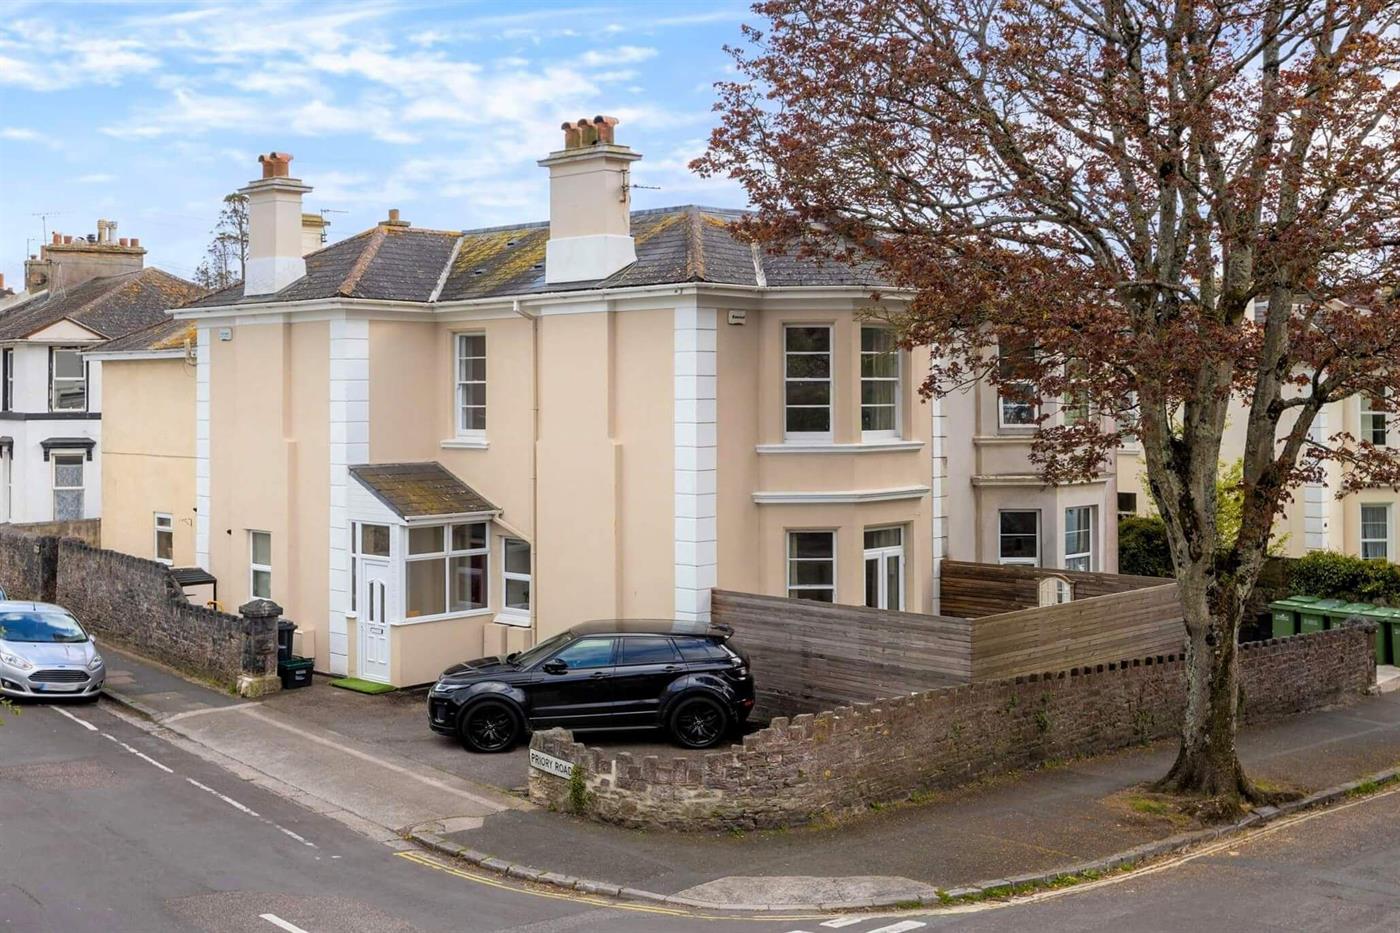 3 Bedroom Semi-Detached House for Sale: Priory Road, St. Marychurch, Torquay, TQ1 4NH